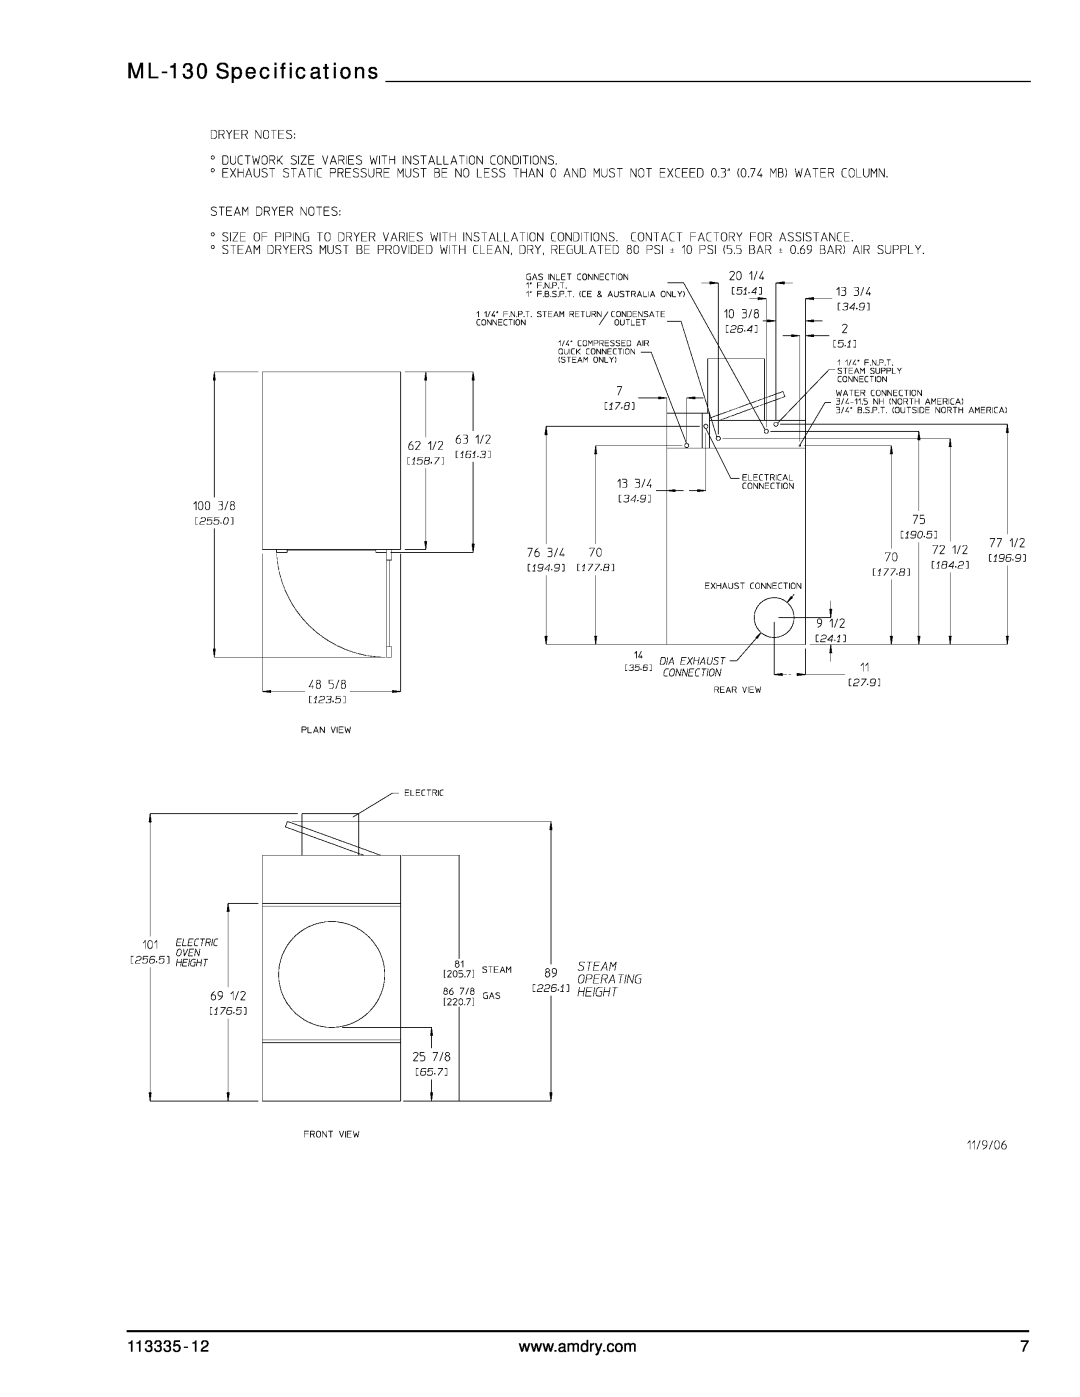 American Dryer Corp ML-130DR, ML-130 III installation manual ML-130 Specifications 